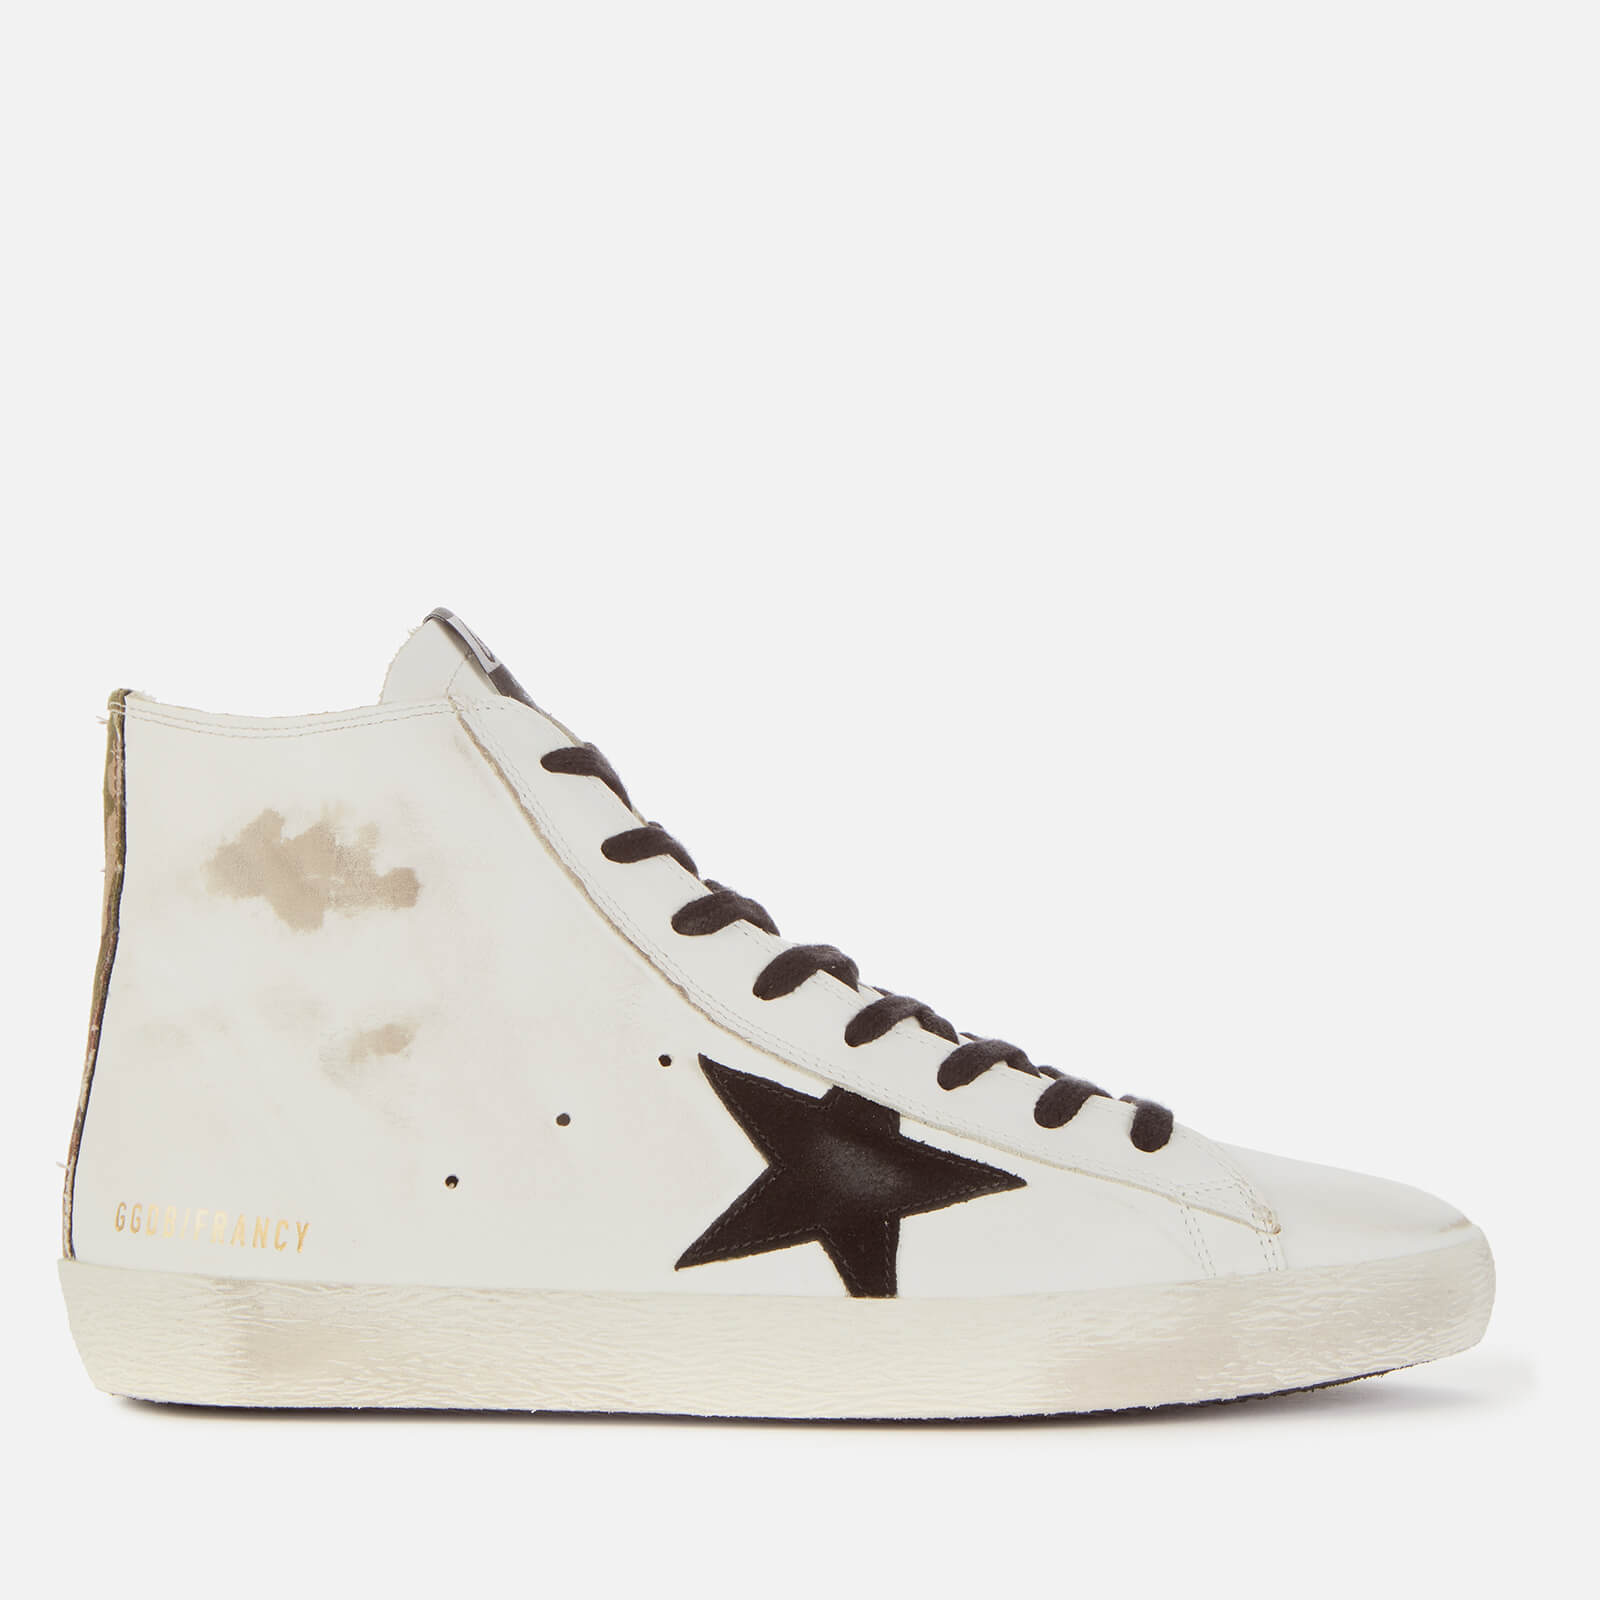 Golden Goose Deluxe Brand Men's Francy Leather Hi-Top Trainers - White/Black/Camouflage - UK 9